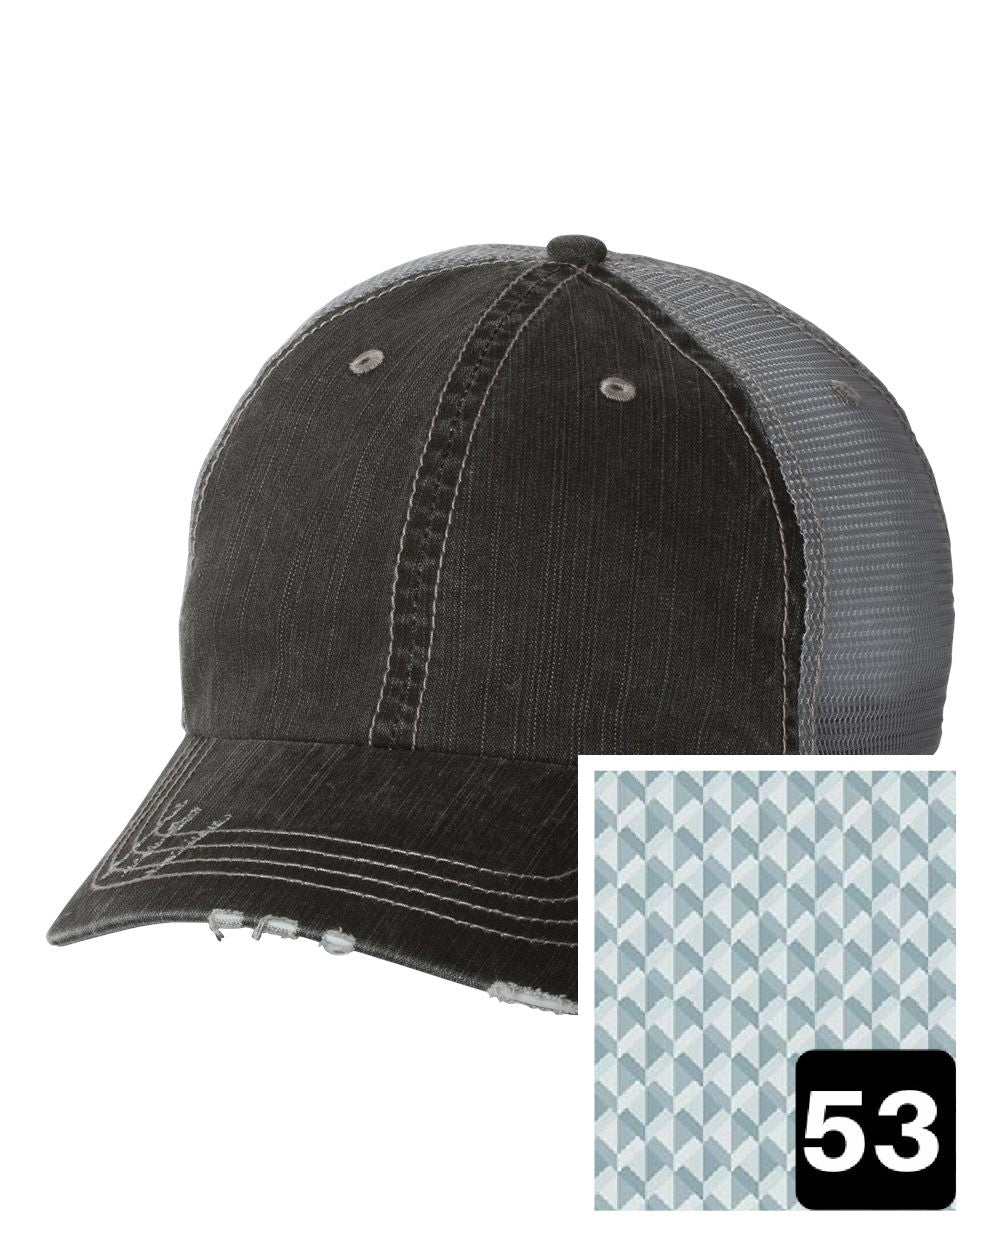 gray distressed trucker hat with multi-color stripe fabric state of Virginia